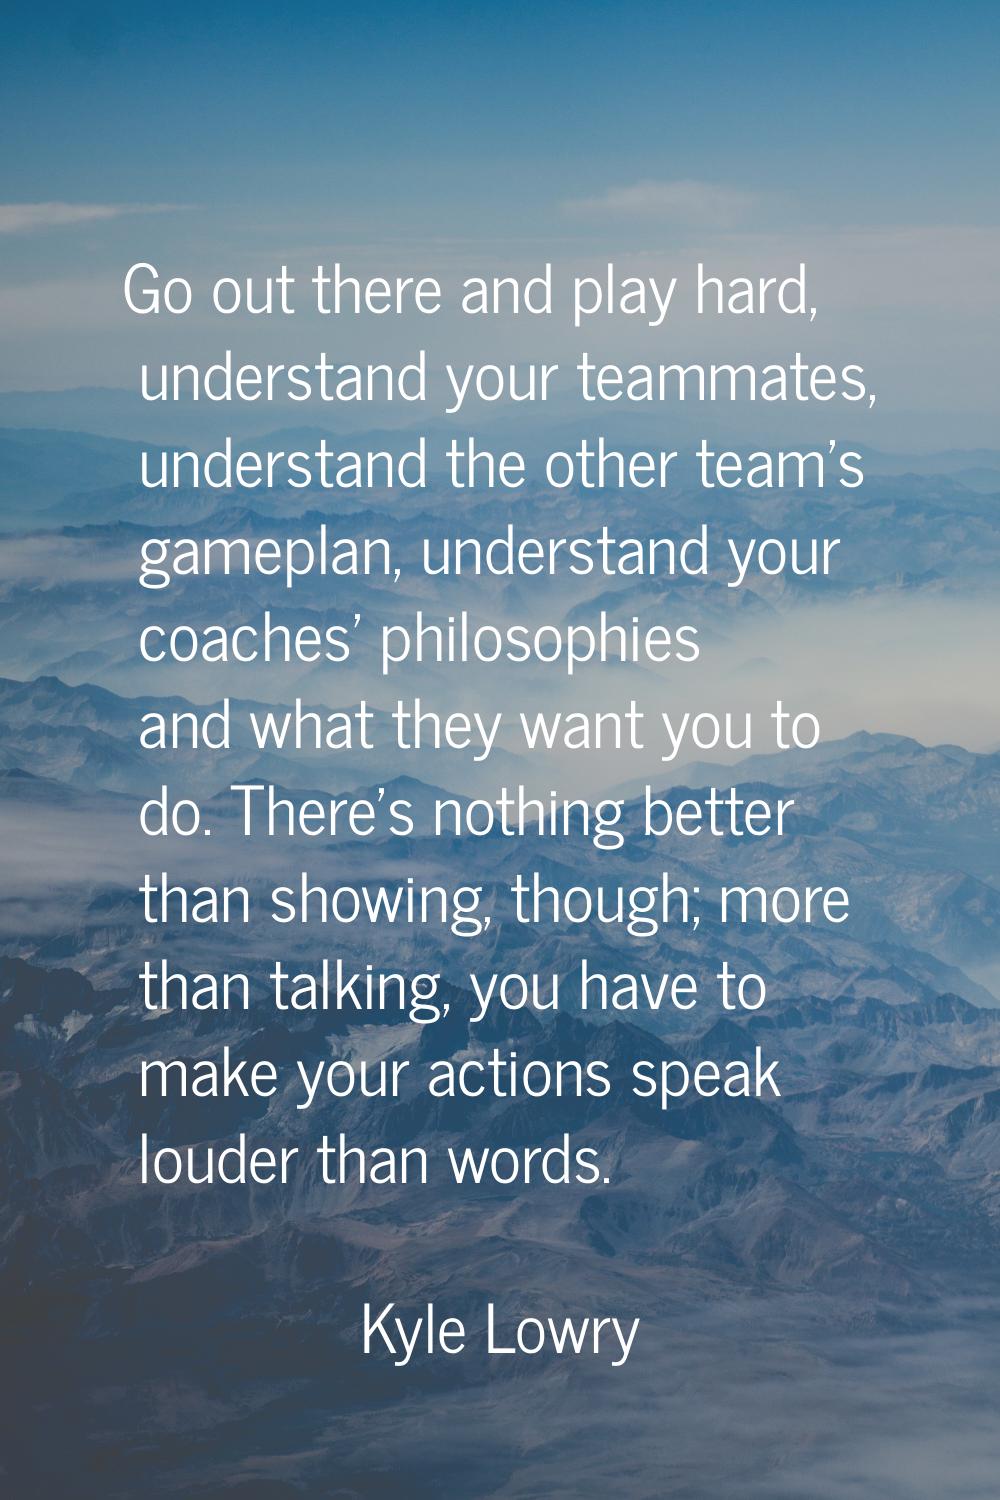 Go out there and play hard, understand your teammates, understand the other team's gameplan, unders